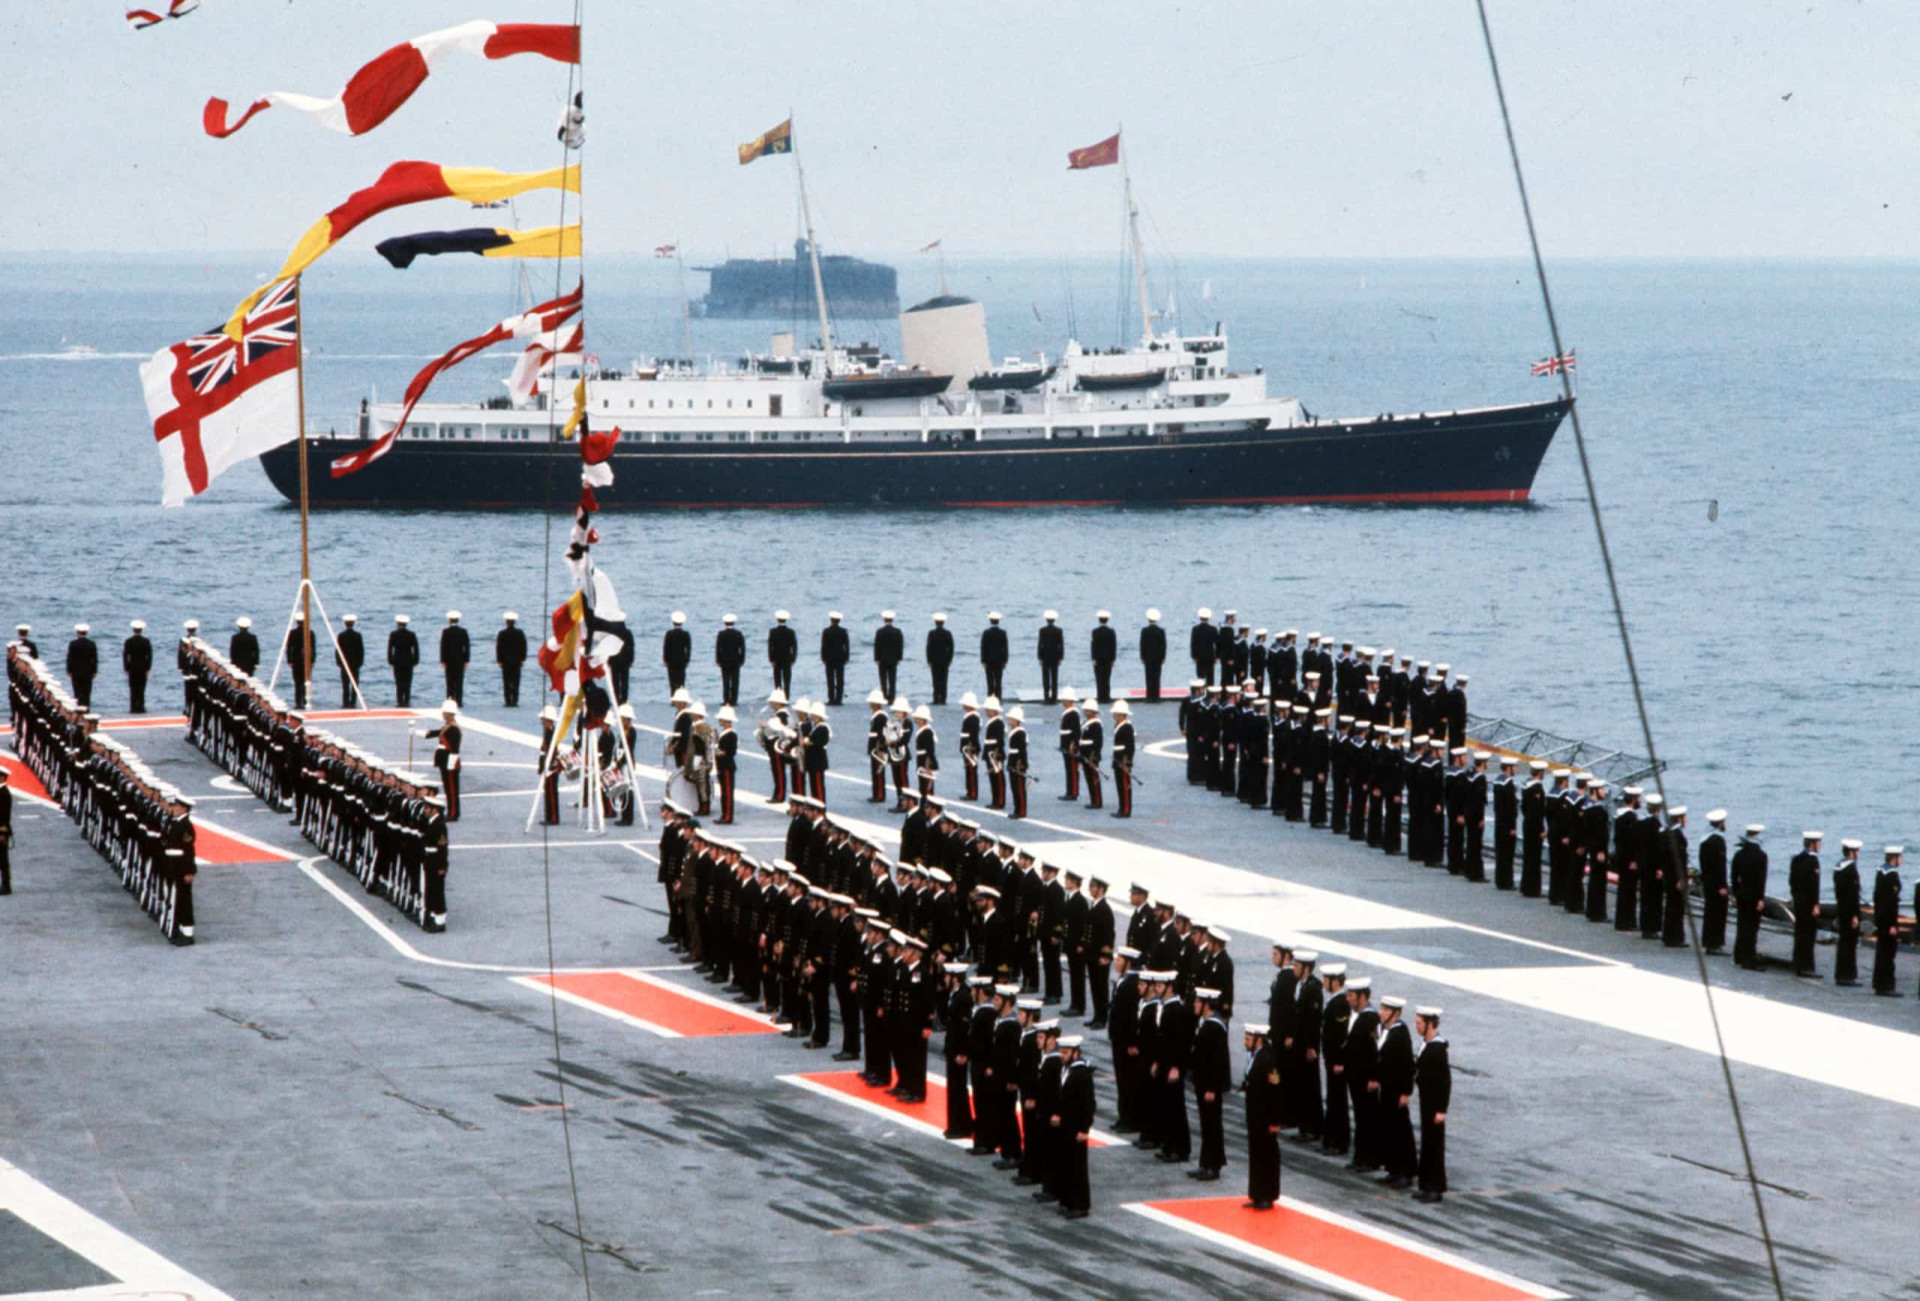 <p>The Silver Jubilee of Queen Elizabeth II in 1977 marked the 25th anniversary of the monarch's accession to the British throne. Among the series of year-long events was the Silver Jubilee Review of the Fleet at Spithead, off Portsmouth in southern England. <em>Britannia</em> sailed past dozens of Royal Navy vessels anchored in the Solent on June 28, 1977.</p><p>You may also like:<a href="https://www.starsinsider.com/n/349594?utm_source=msn.com&utm_medium=display&utm_campaign=referral_description&utm_content=474709v3en-us"> Celebrity siblings that fame forgot</a></p>